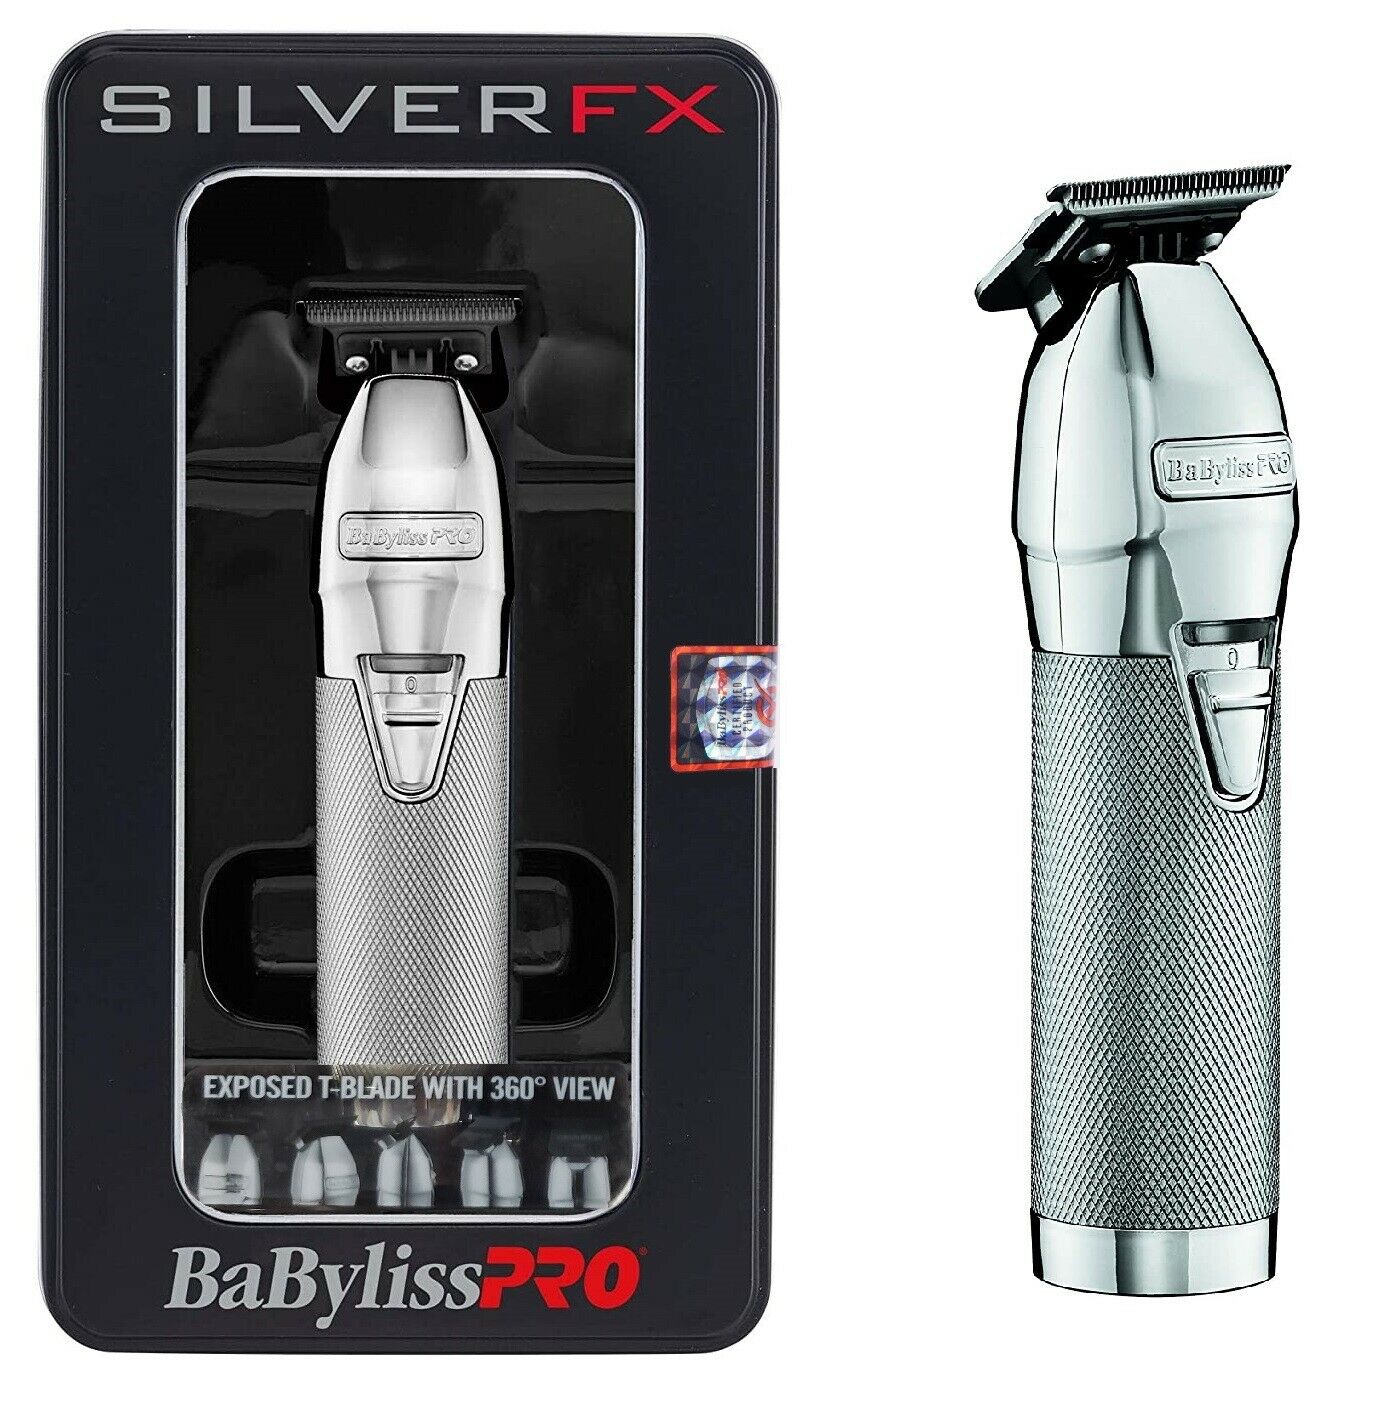 BabylissPRO 'Skeleton' Metal Trimmer with Exposed T-Blade FX787G